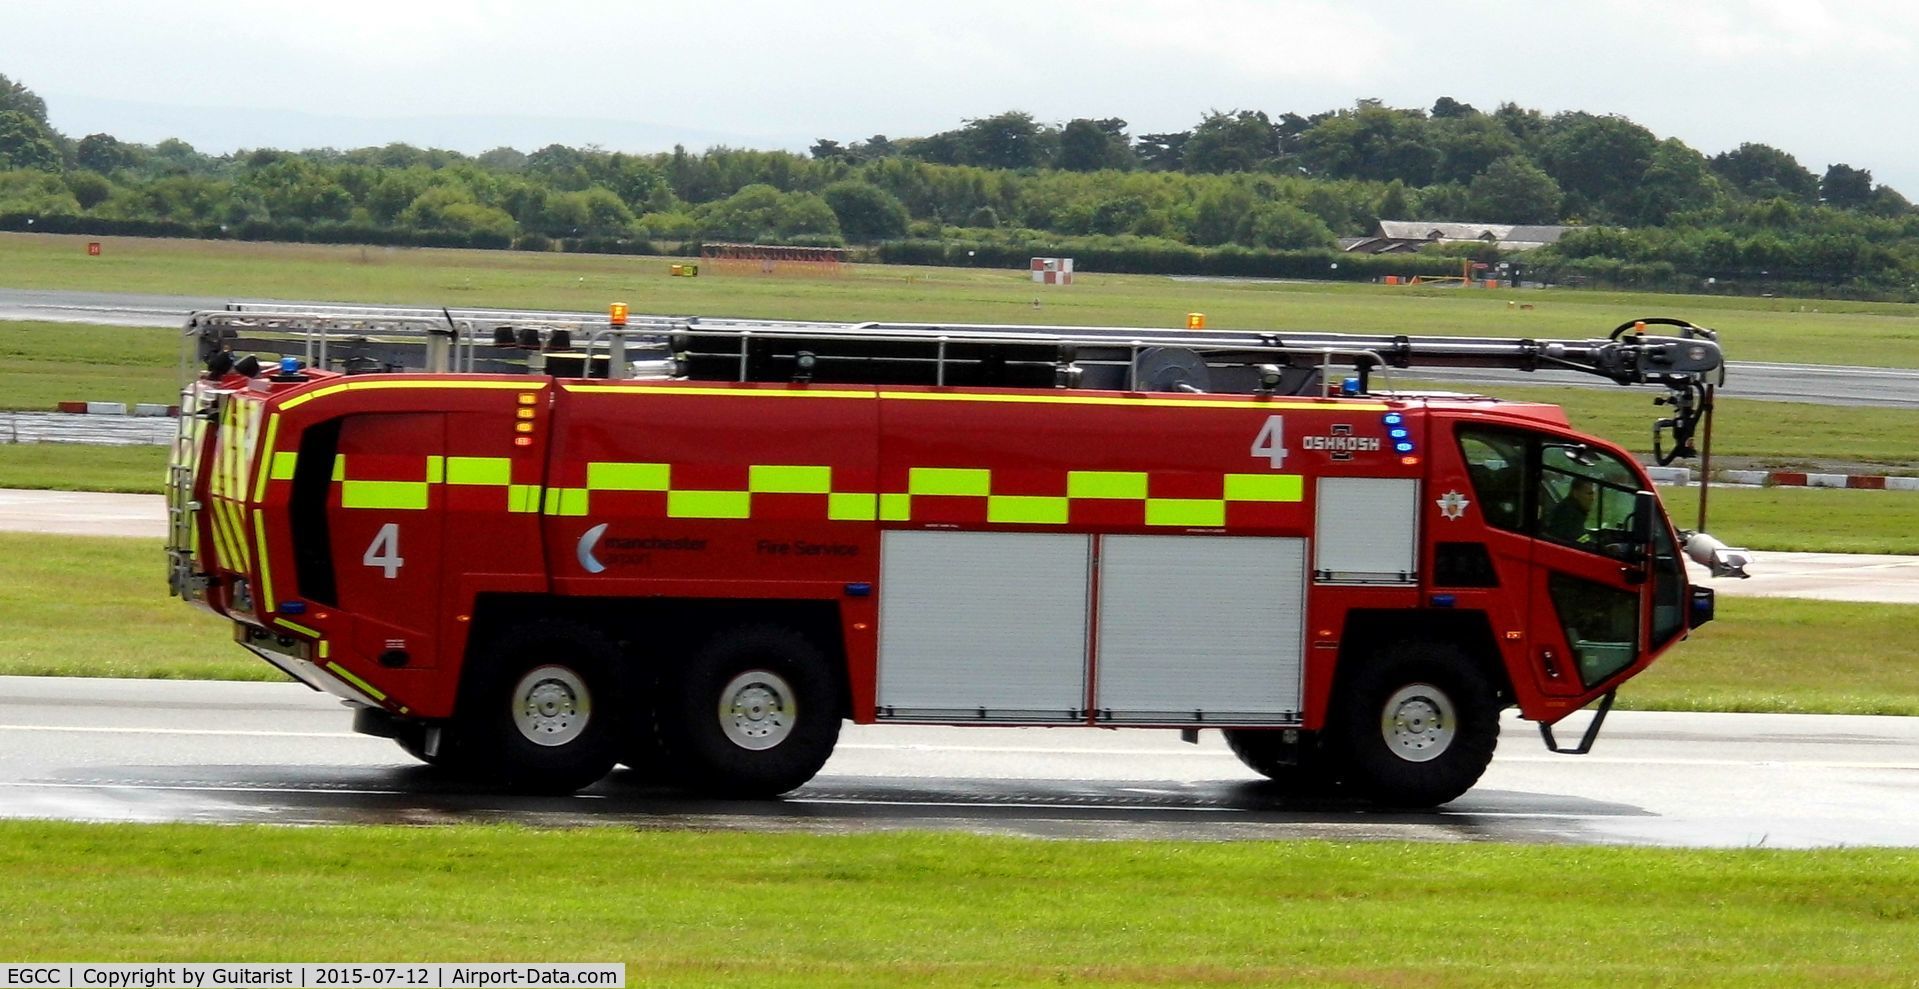 Manchester Airport, Manchester, England United Kingdom (EGCC) - Fire engine 4 at Manchester